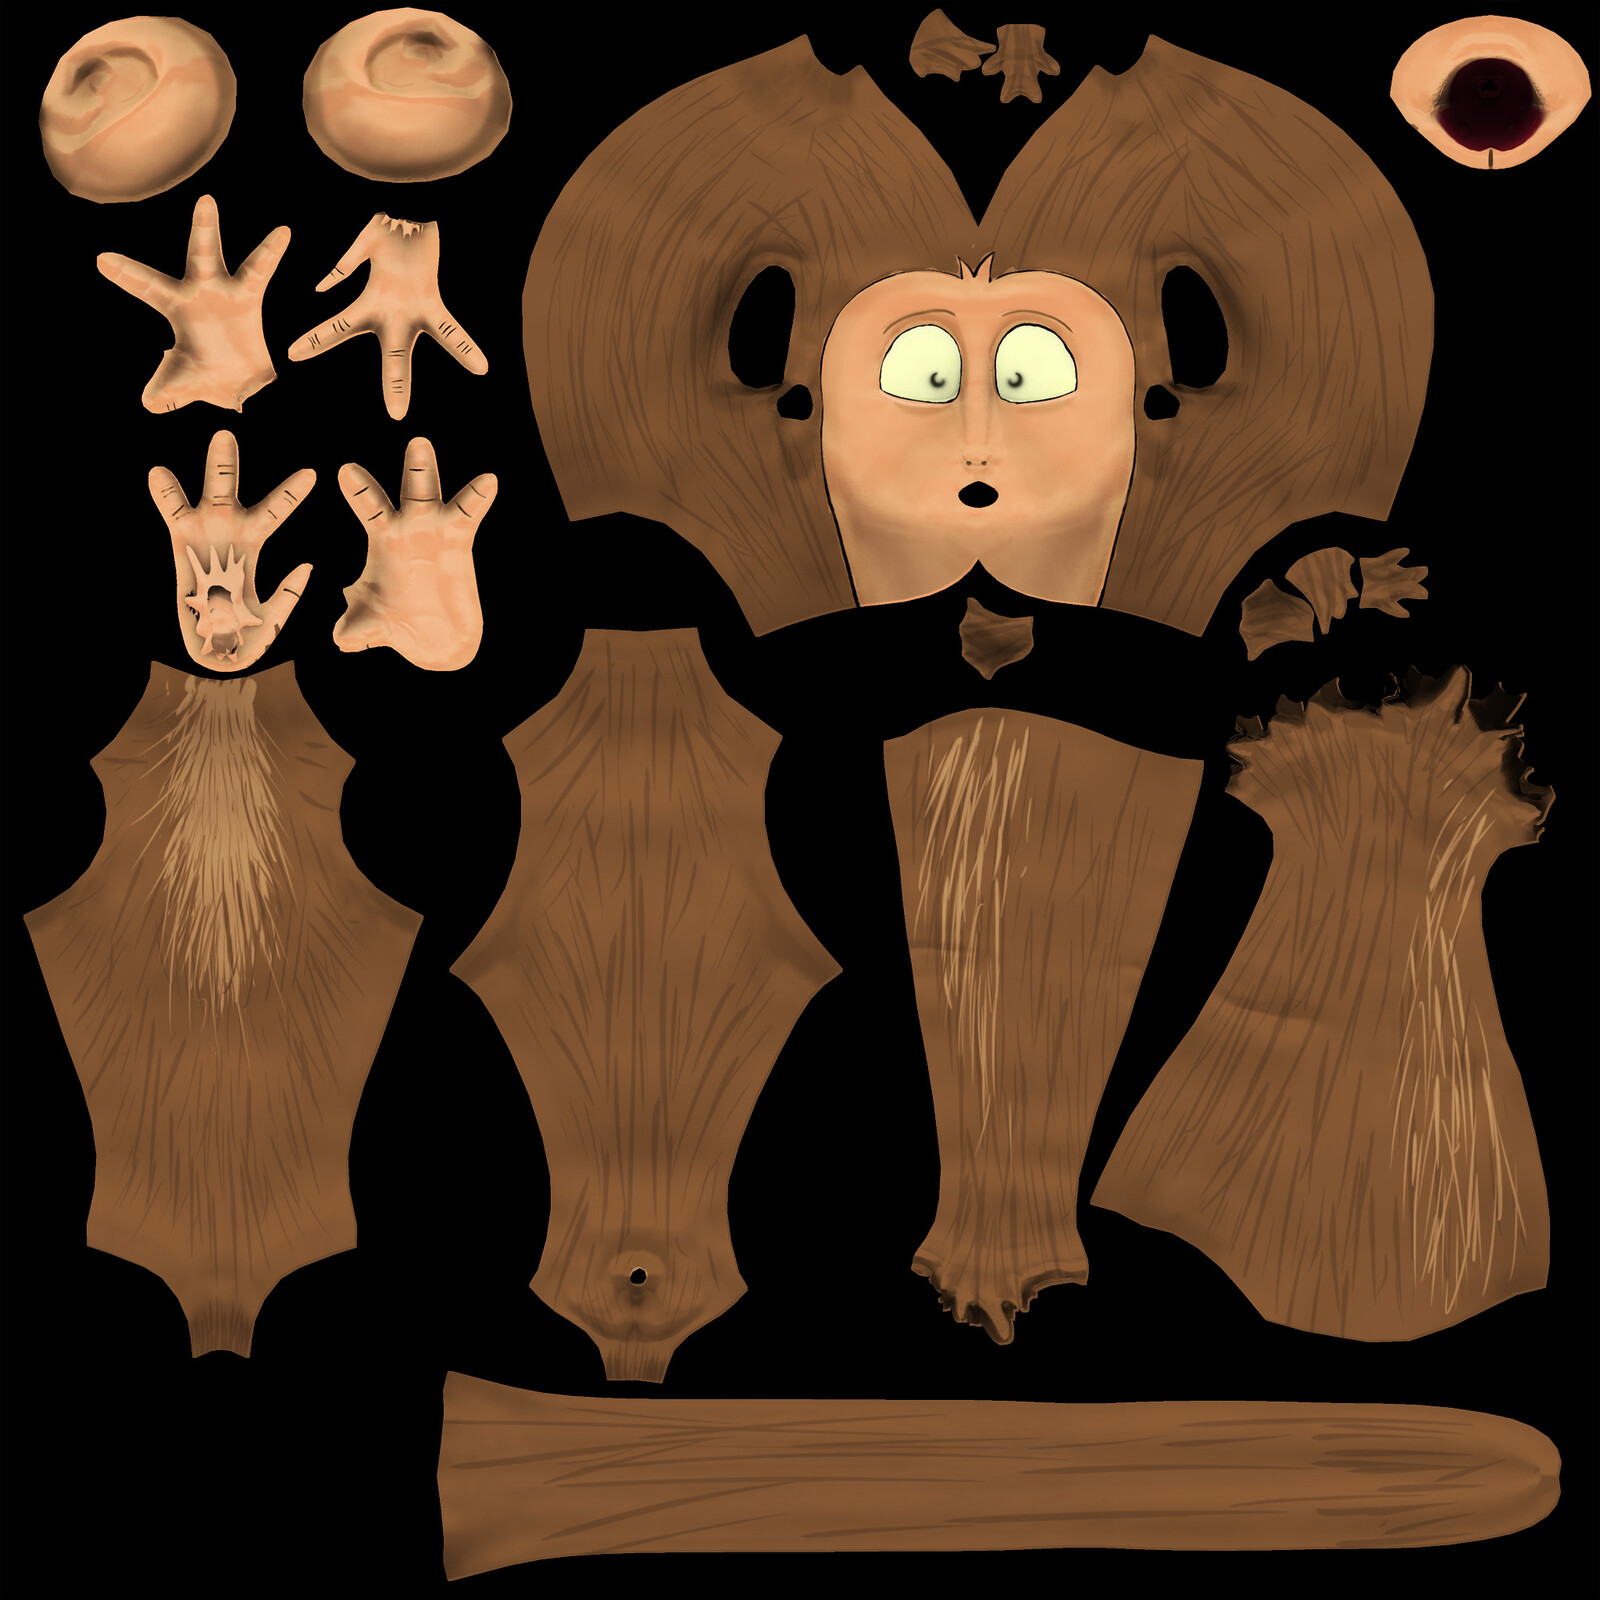 Monkey Skin! Painted up the texture for the animated monkey in the game.